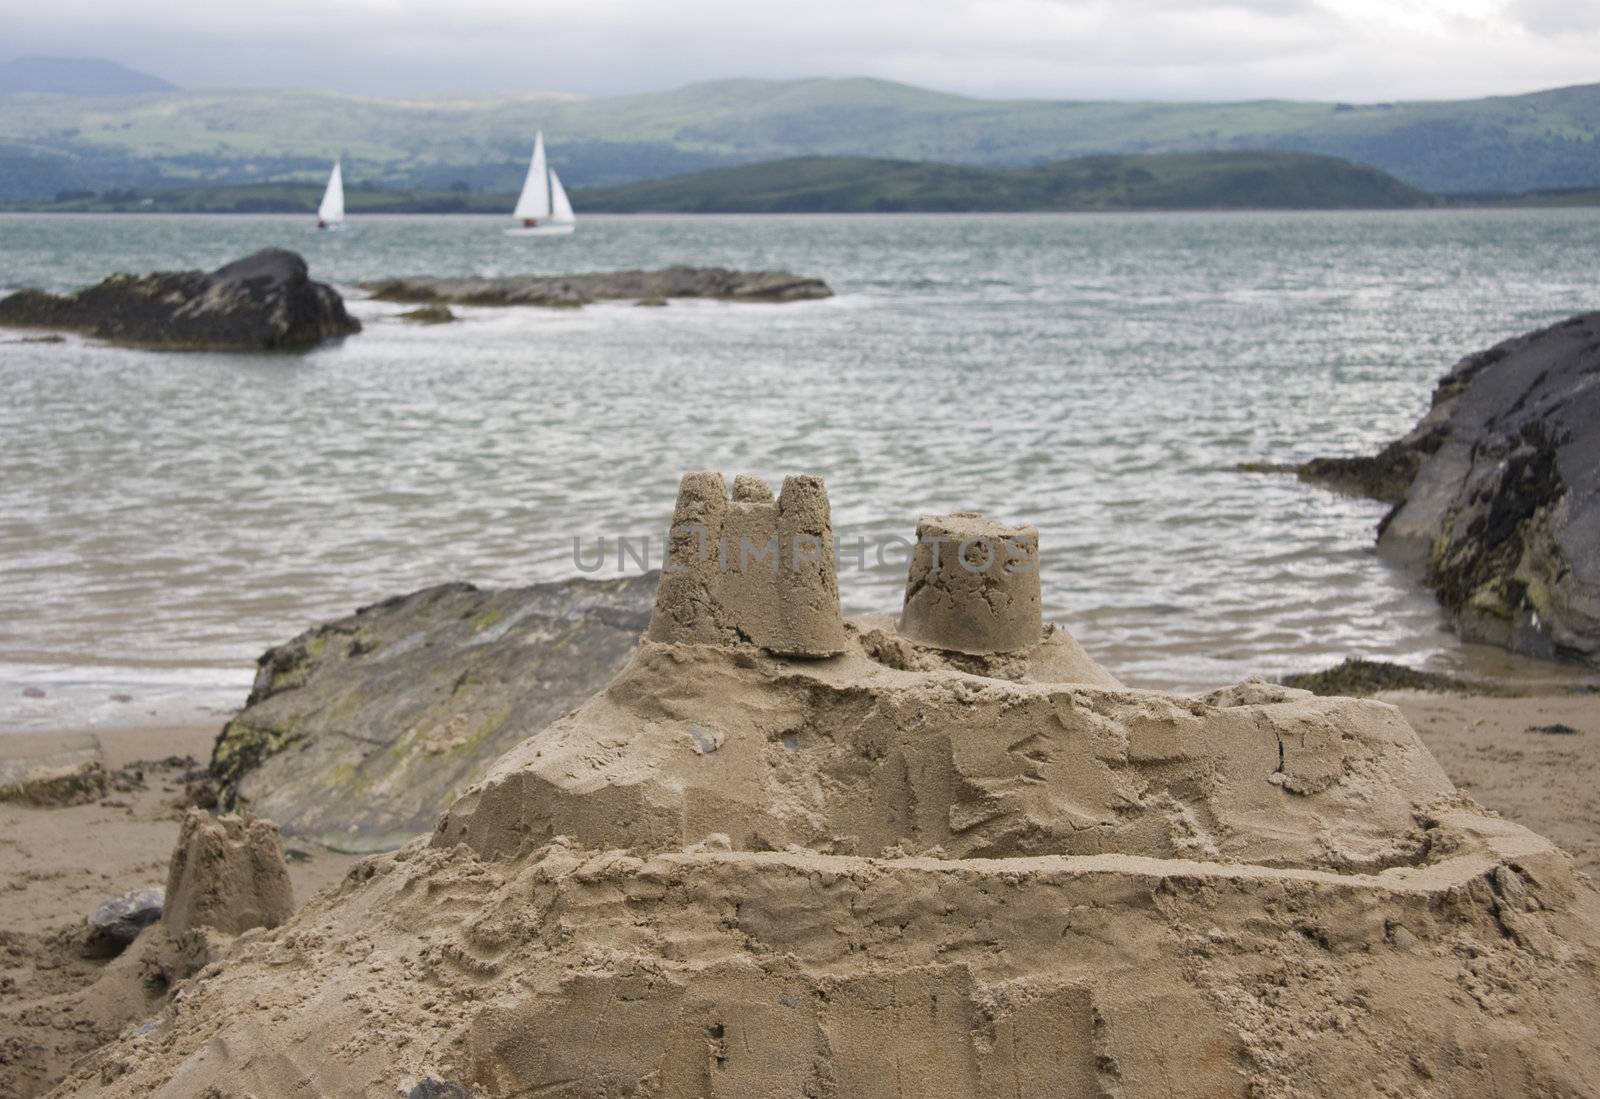 Sand castle on seas edge with two yachts sailing by.